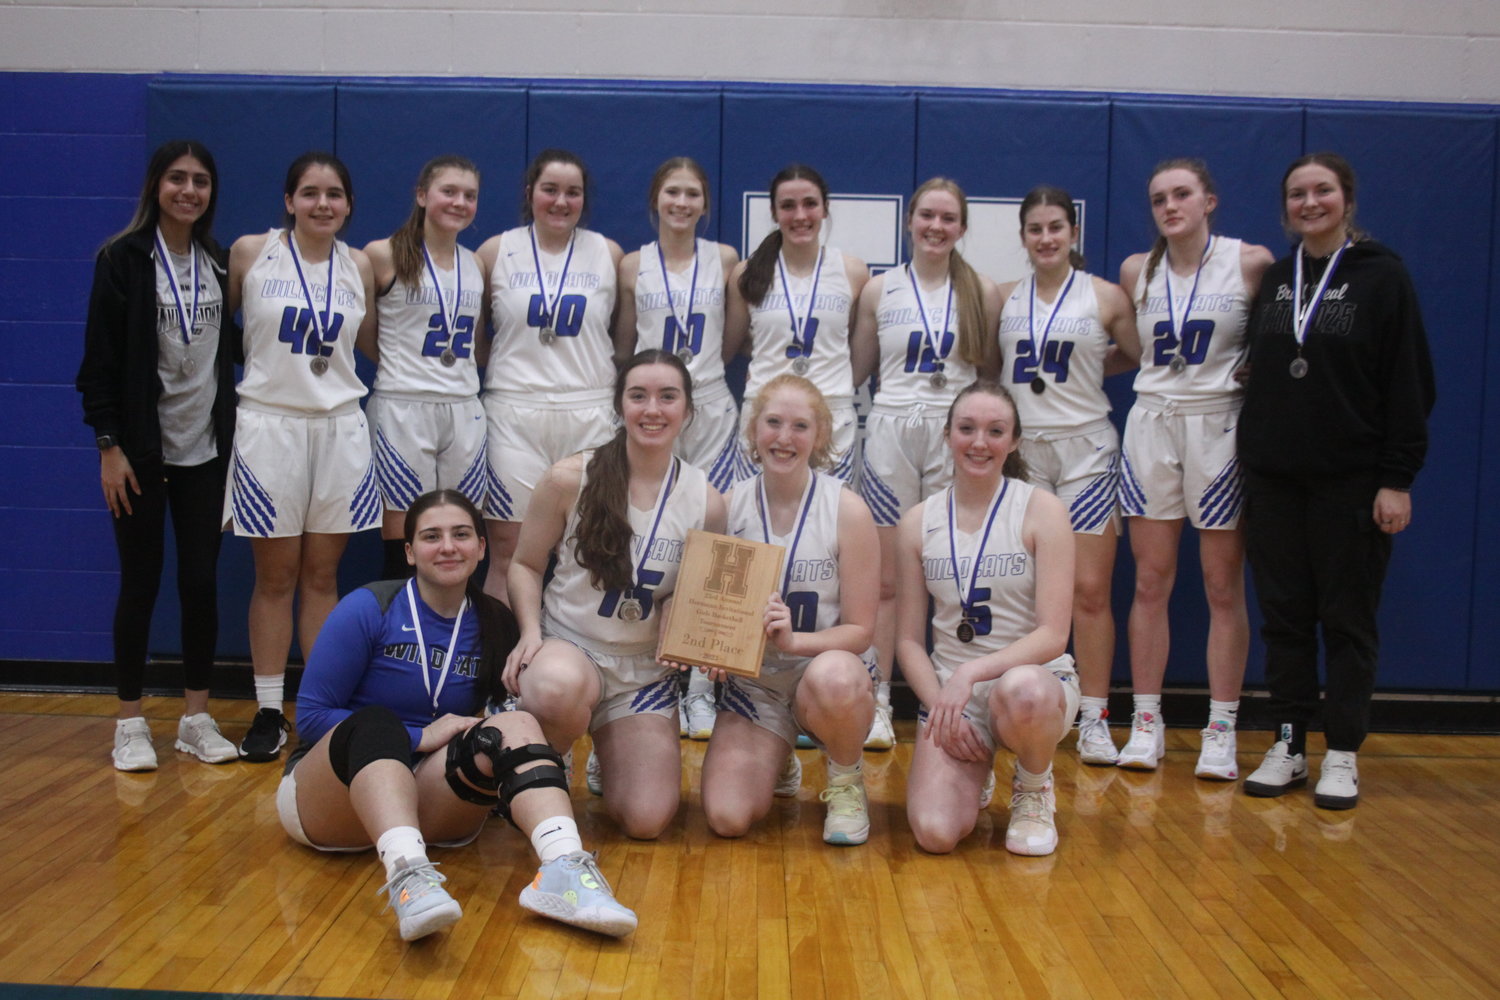 The Montgomery County girls basketball team poses with its second-place plaque after losing to Owensville 50-48 in the championship game of the Hermann Invitational Tournament on Jan. 27. Pictured, front row from left, are Carissa Doyle, Maddie Wisdom, Bailey Fischer and Carson Flake. Back row are Karla Gonzalez, Avery Leu, Malia Rodgers, Aliviah Fischer, Miley Rieke, Claire Cobb, Madi Polston, Maddy Queathem, Olivia Shaw and Atlanta Kobusch.